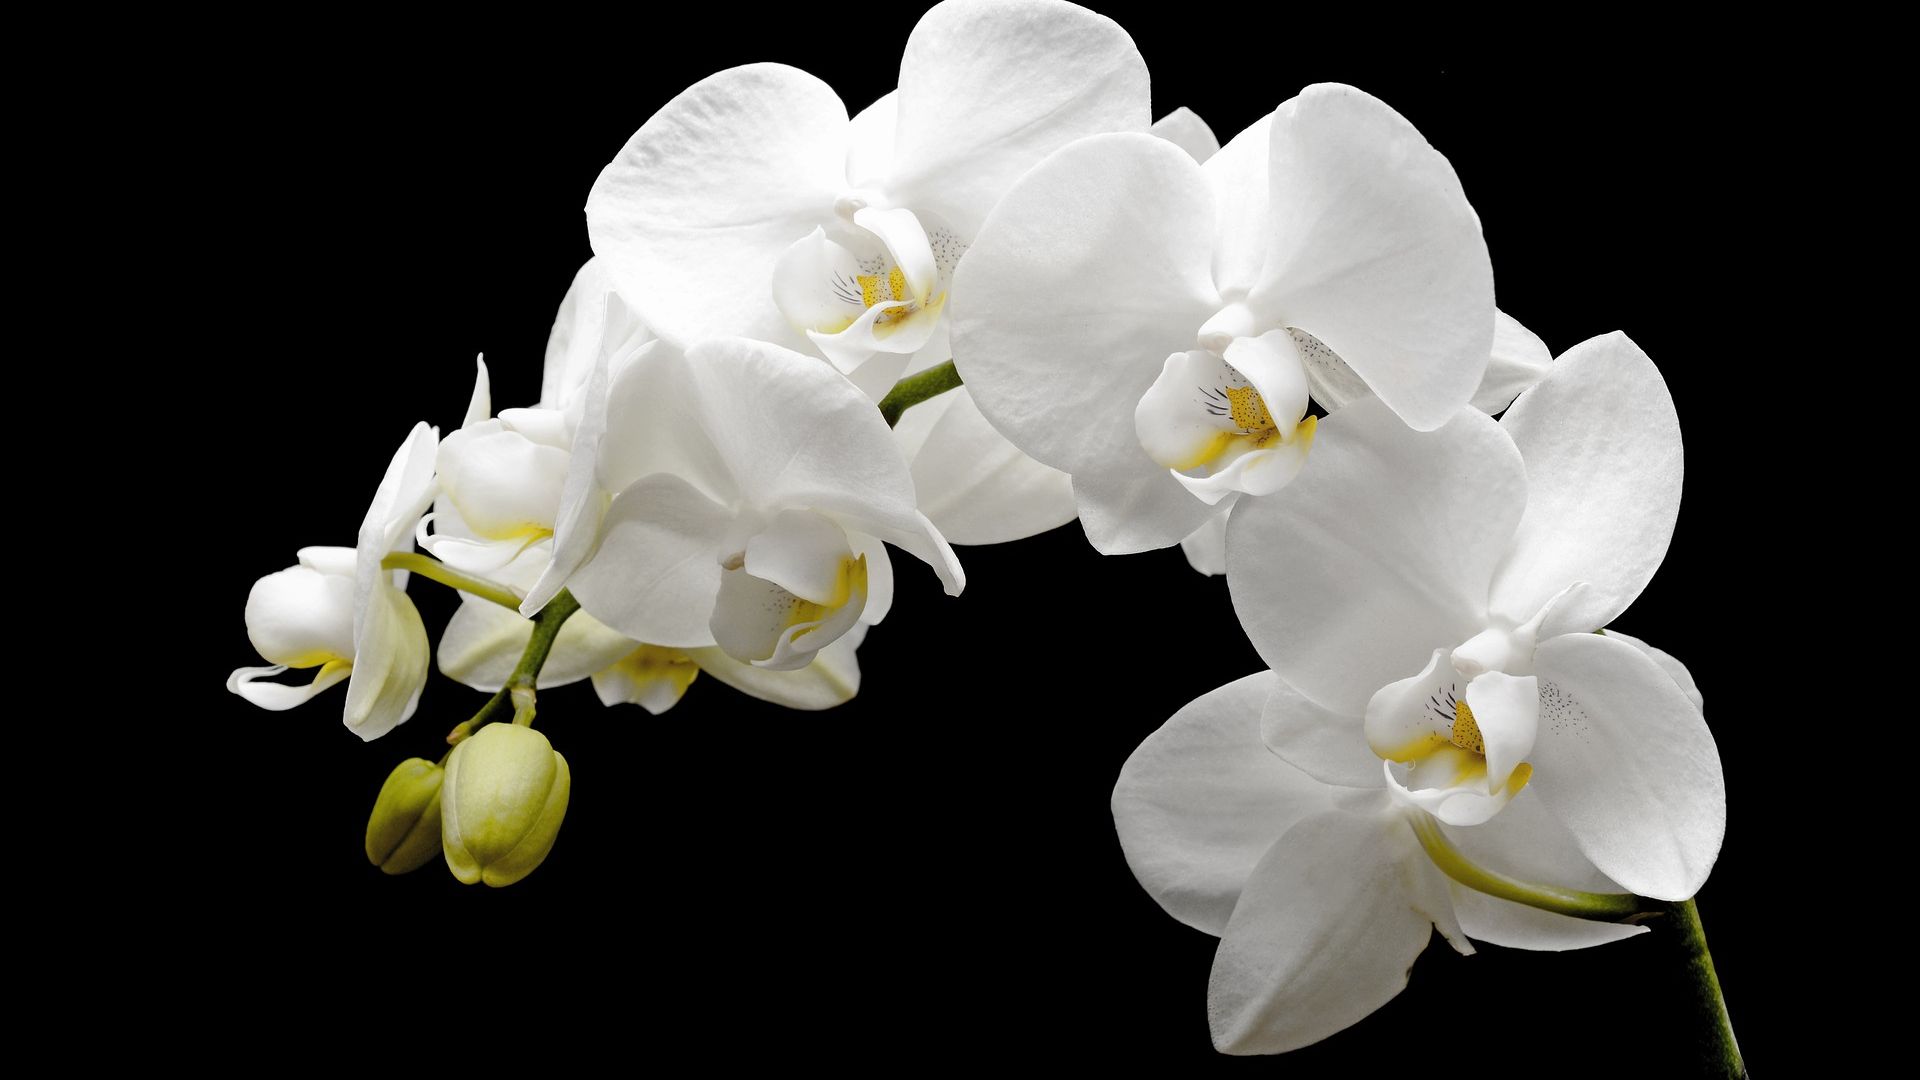 Blossom, White Orchid Flowers Wallpaper, 1920x1280, Hd Image, Picture ...